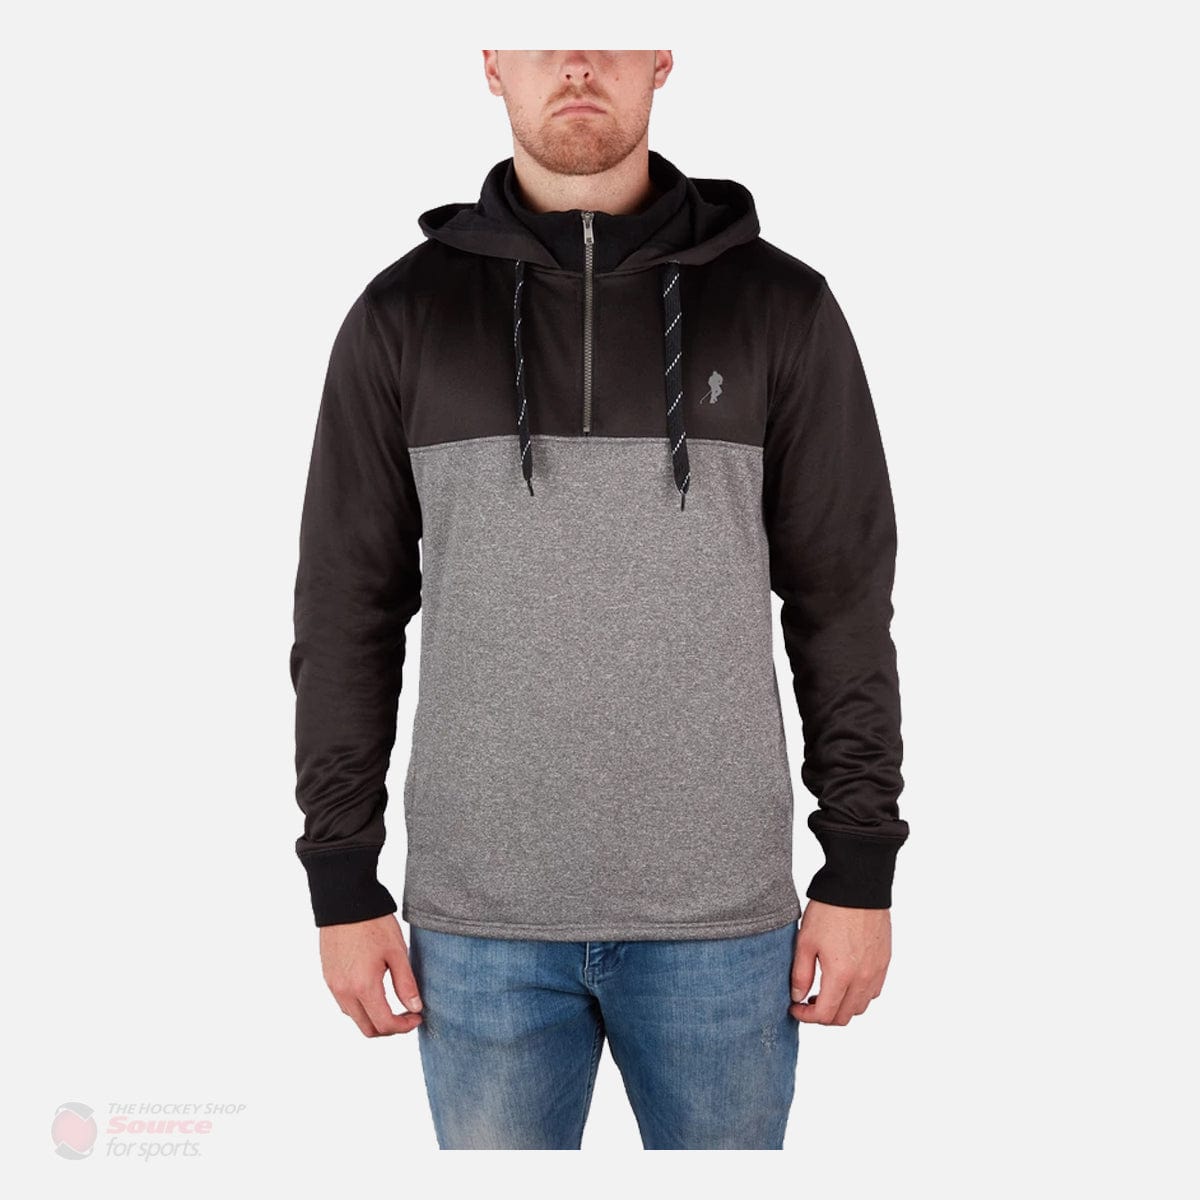 Gongshow Hockey The Toe Diddy Mens Hoody